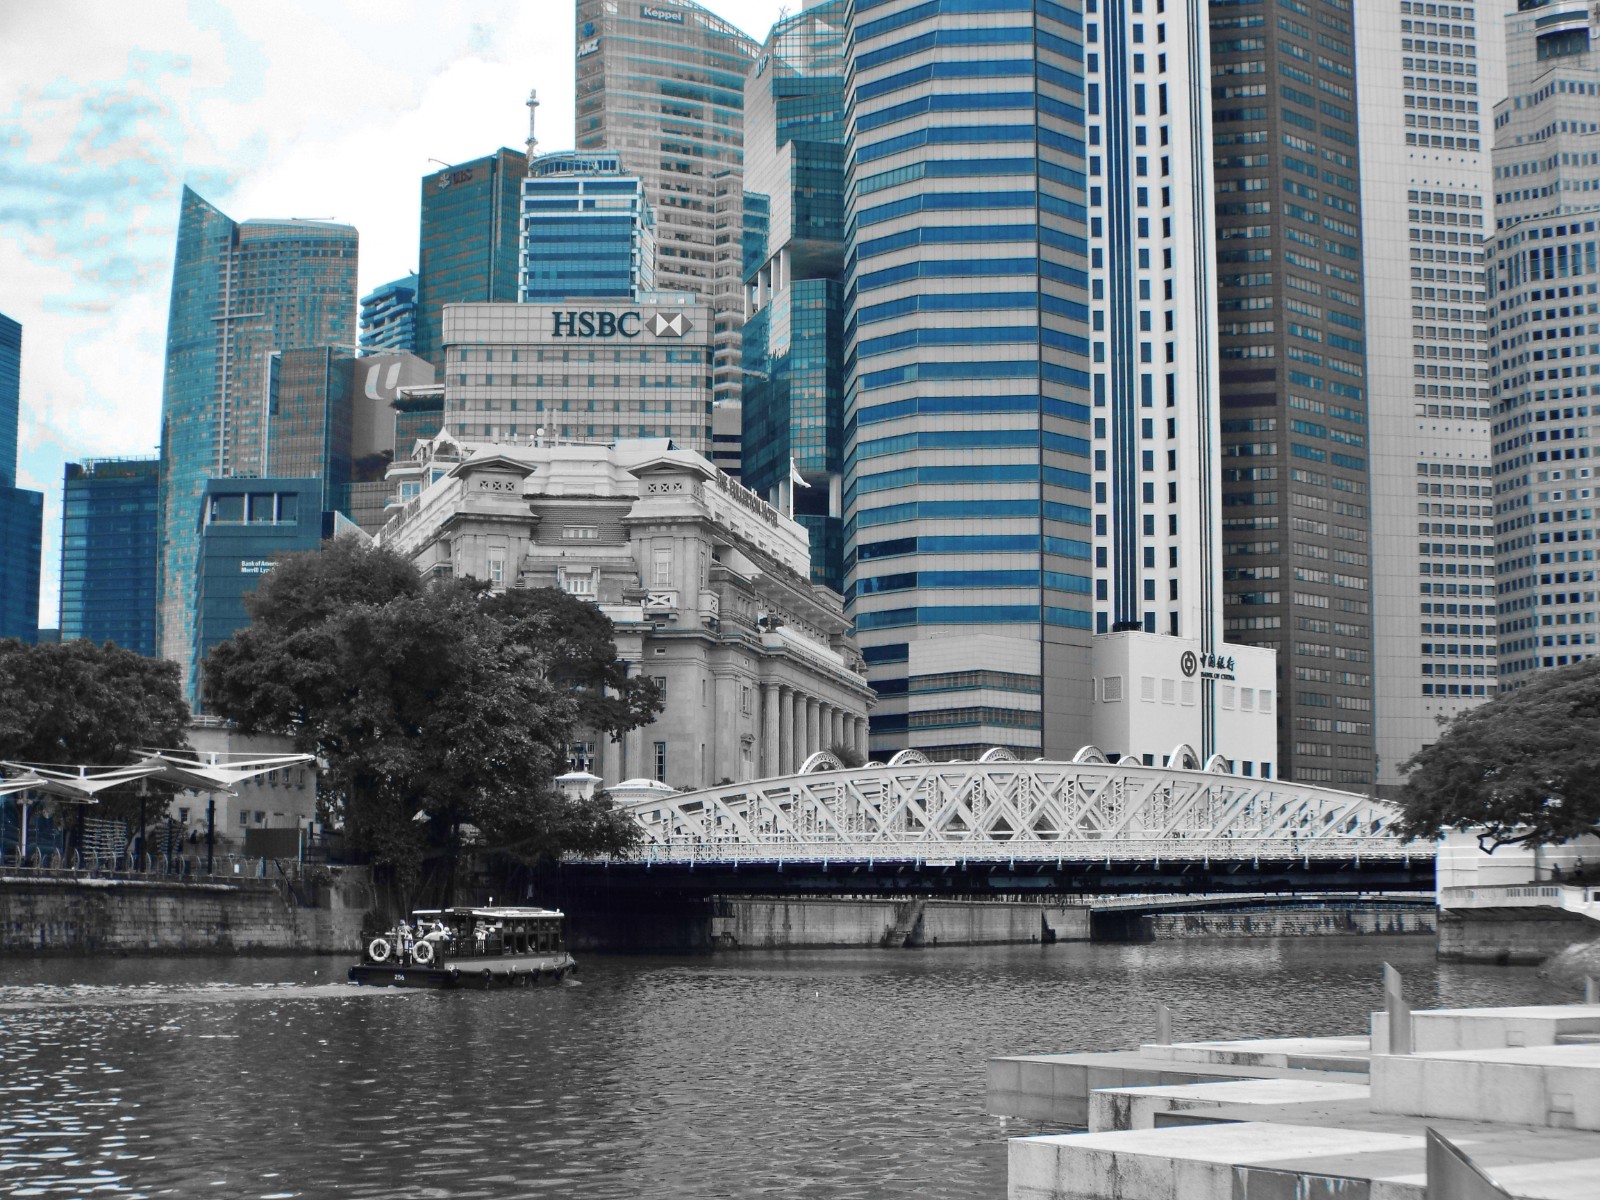 Architectural heritage overwhelmed, Singapore | Architecture | History | Building | River | Boats | Bridge | Blue | City | People | Stone